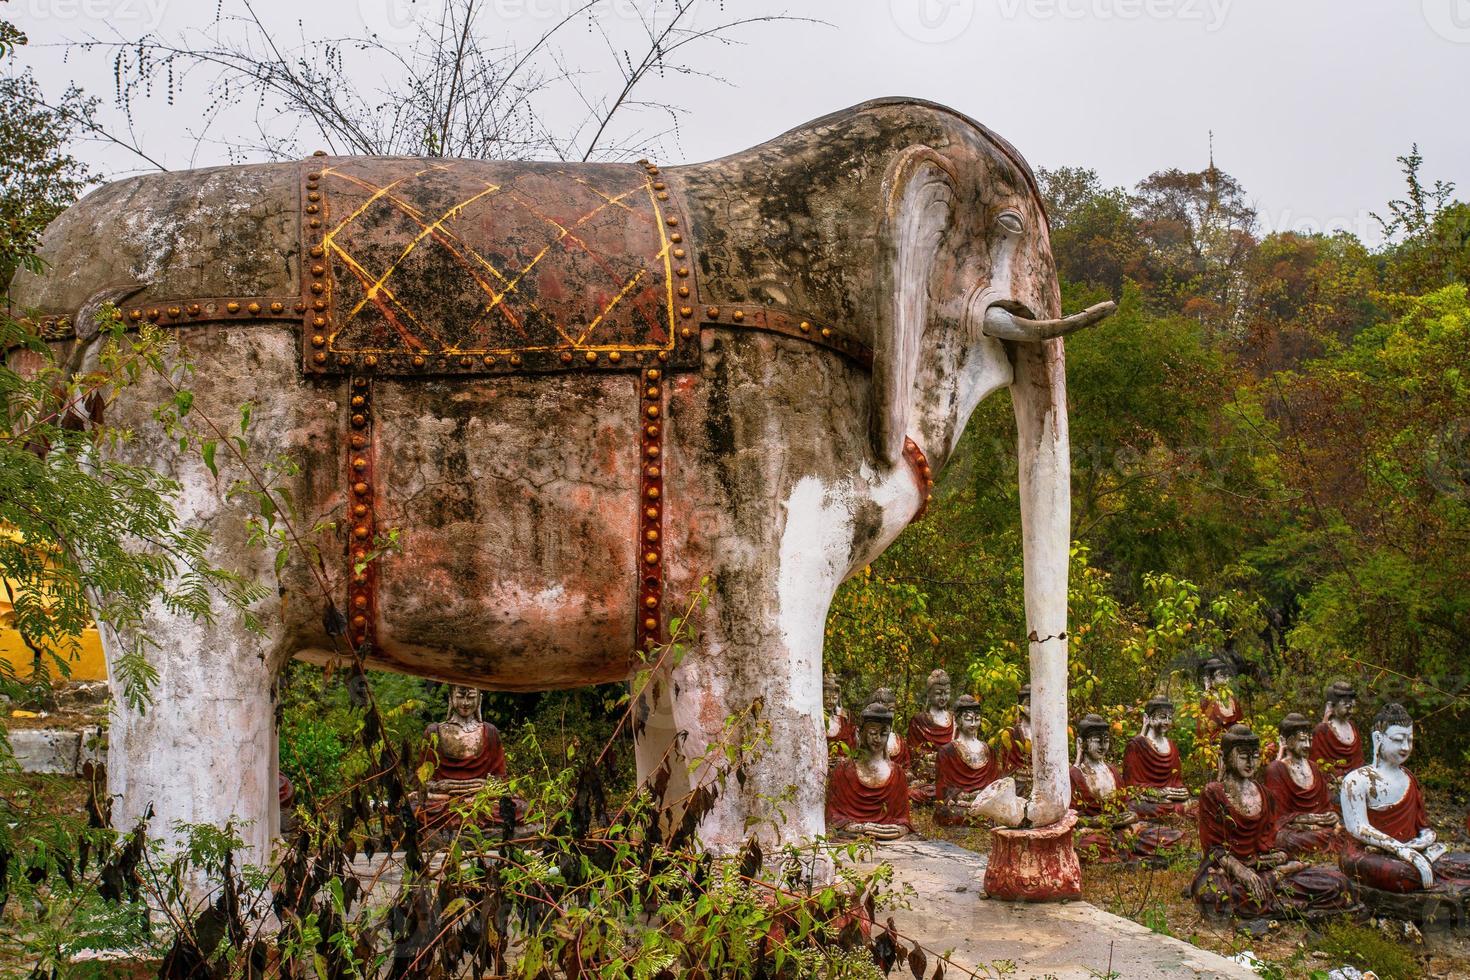 Elephant sculpture in old temple with numerous of old Image of Buddha on mountain in Mingun, Sagaing Region, Myanmar photo